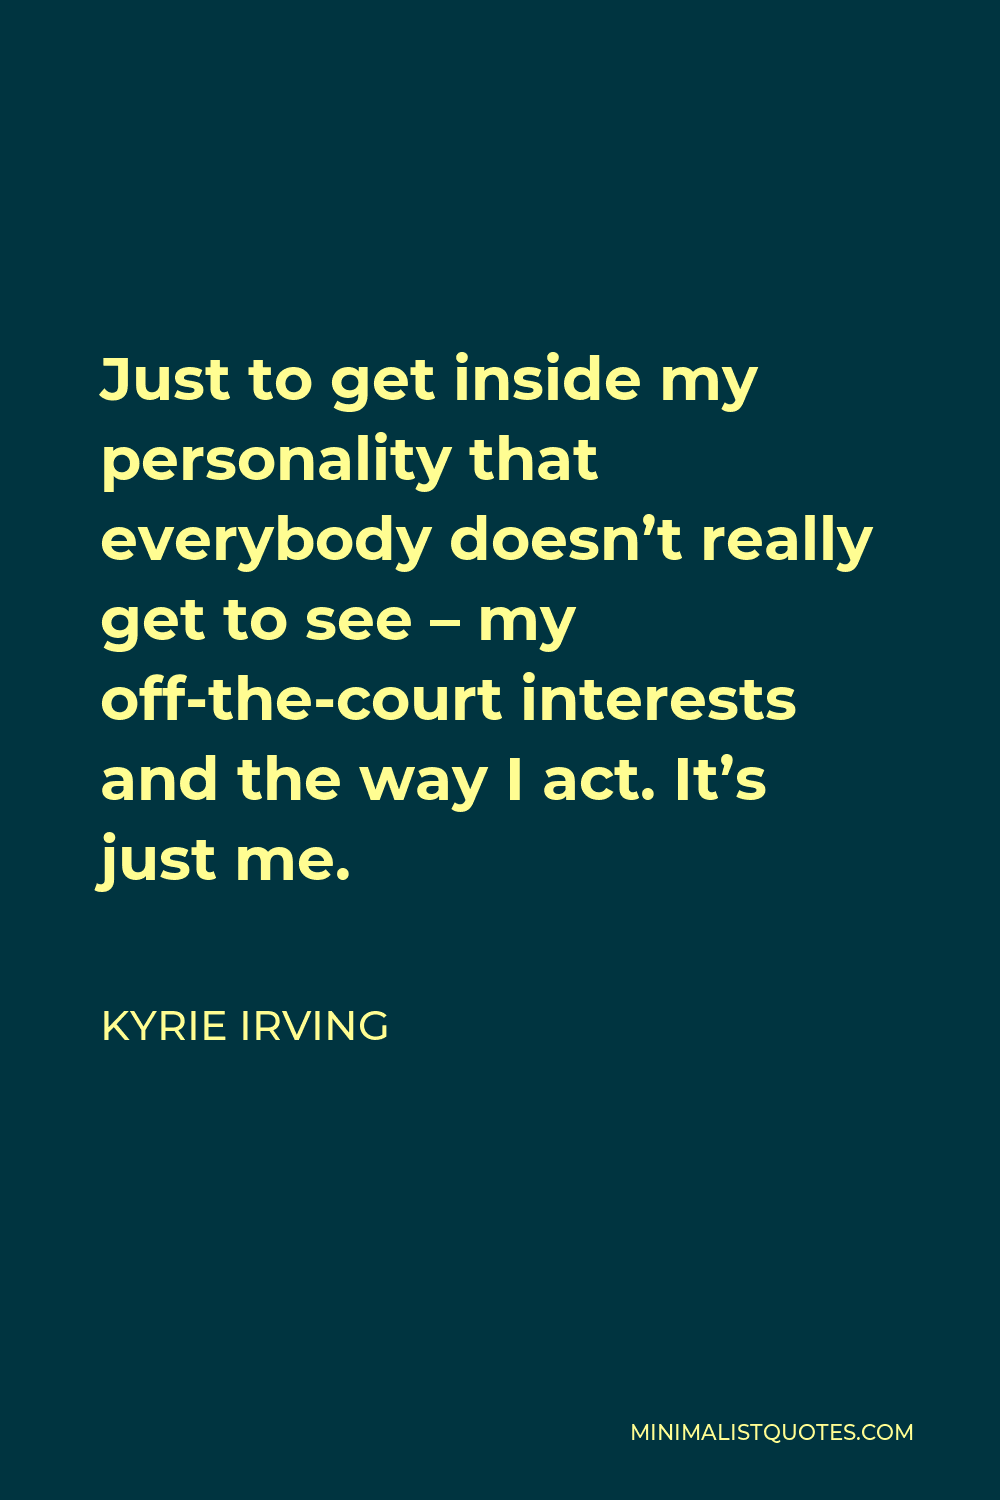 Kyrie Irving Quote - Just to get inside my personality that everybody doesn’t really get to see – my off-the-court interests and the way I act. It’s just me.